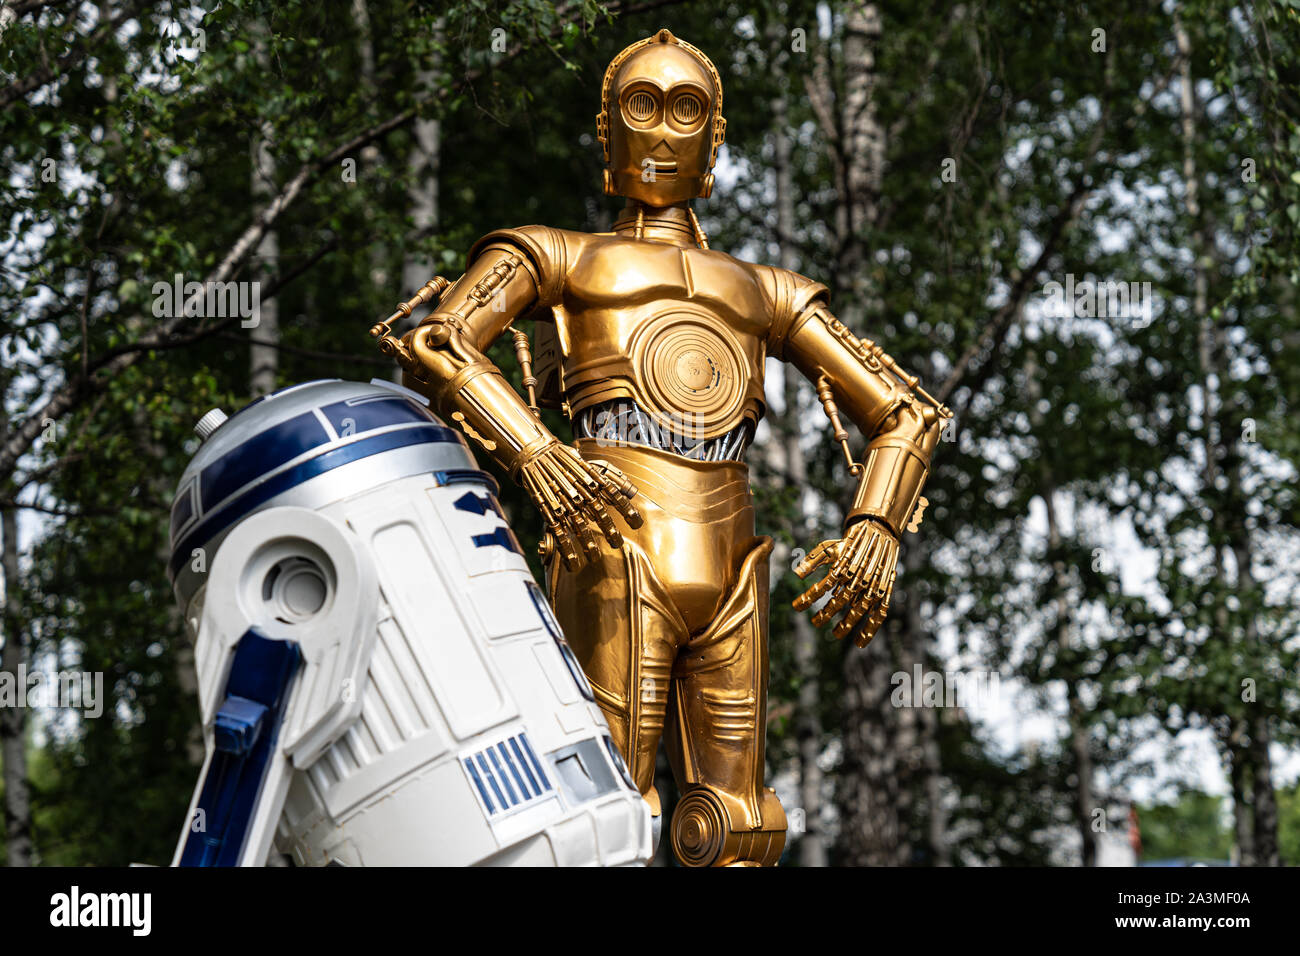 Izhevsk Russia 07.09.2018 Statues of robots from Star Wars movie, r2d2 and c3p0 outdoors, golden and white robots with trees on background Stock Photo